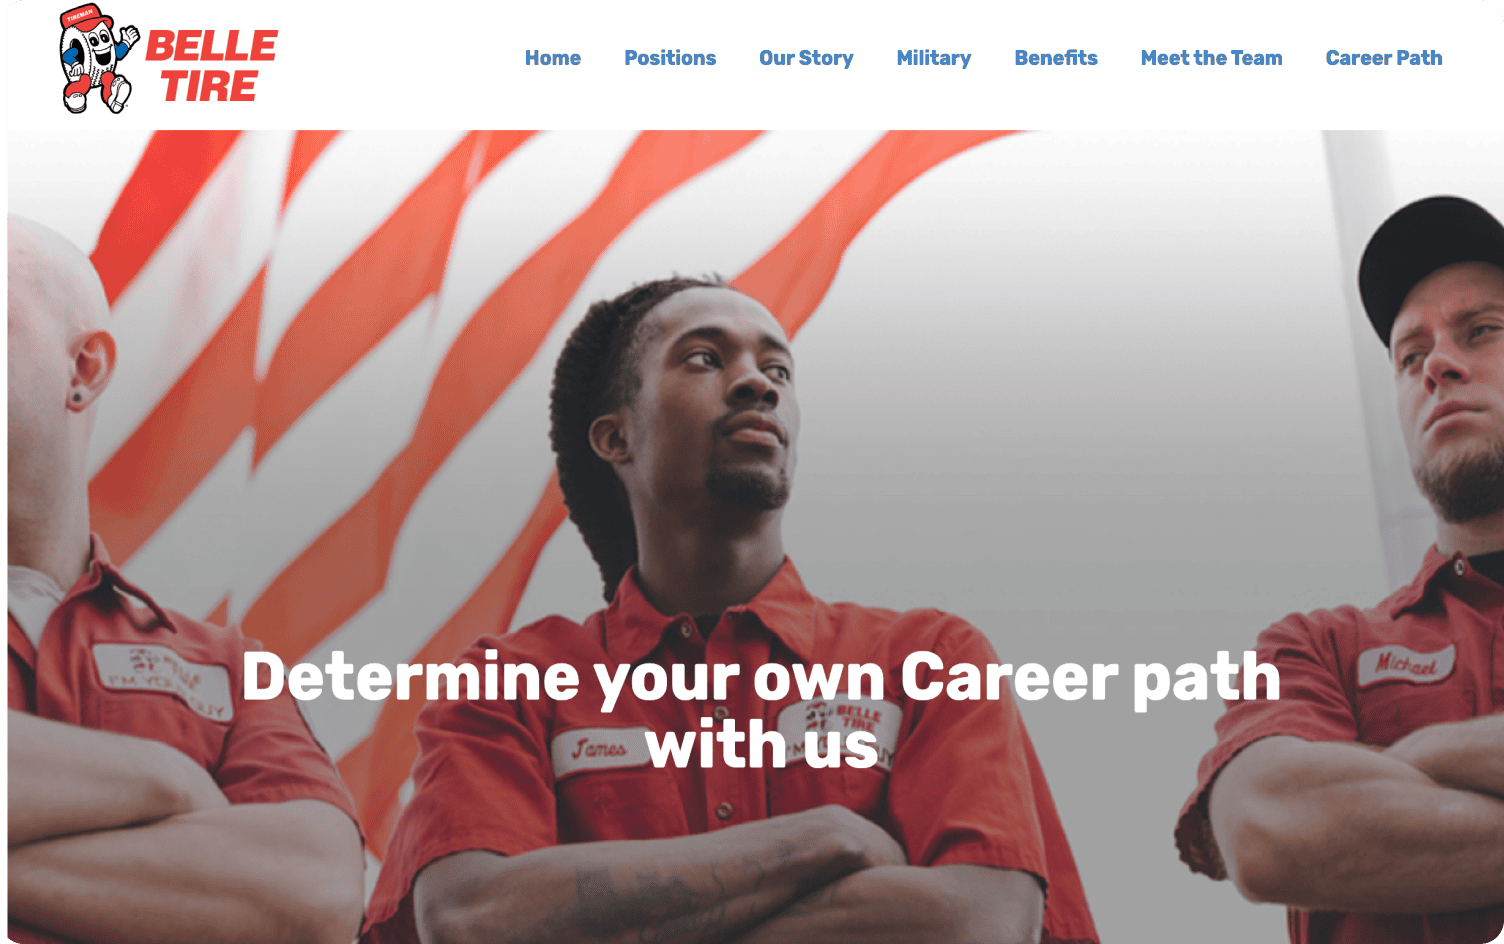 Belle Tire Career Page